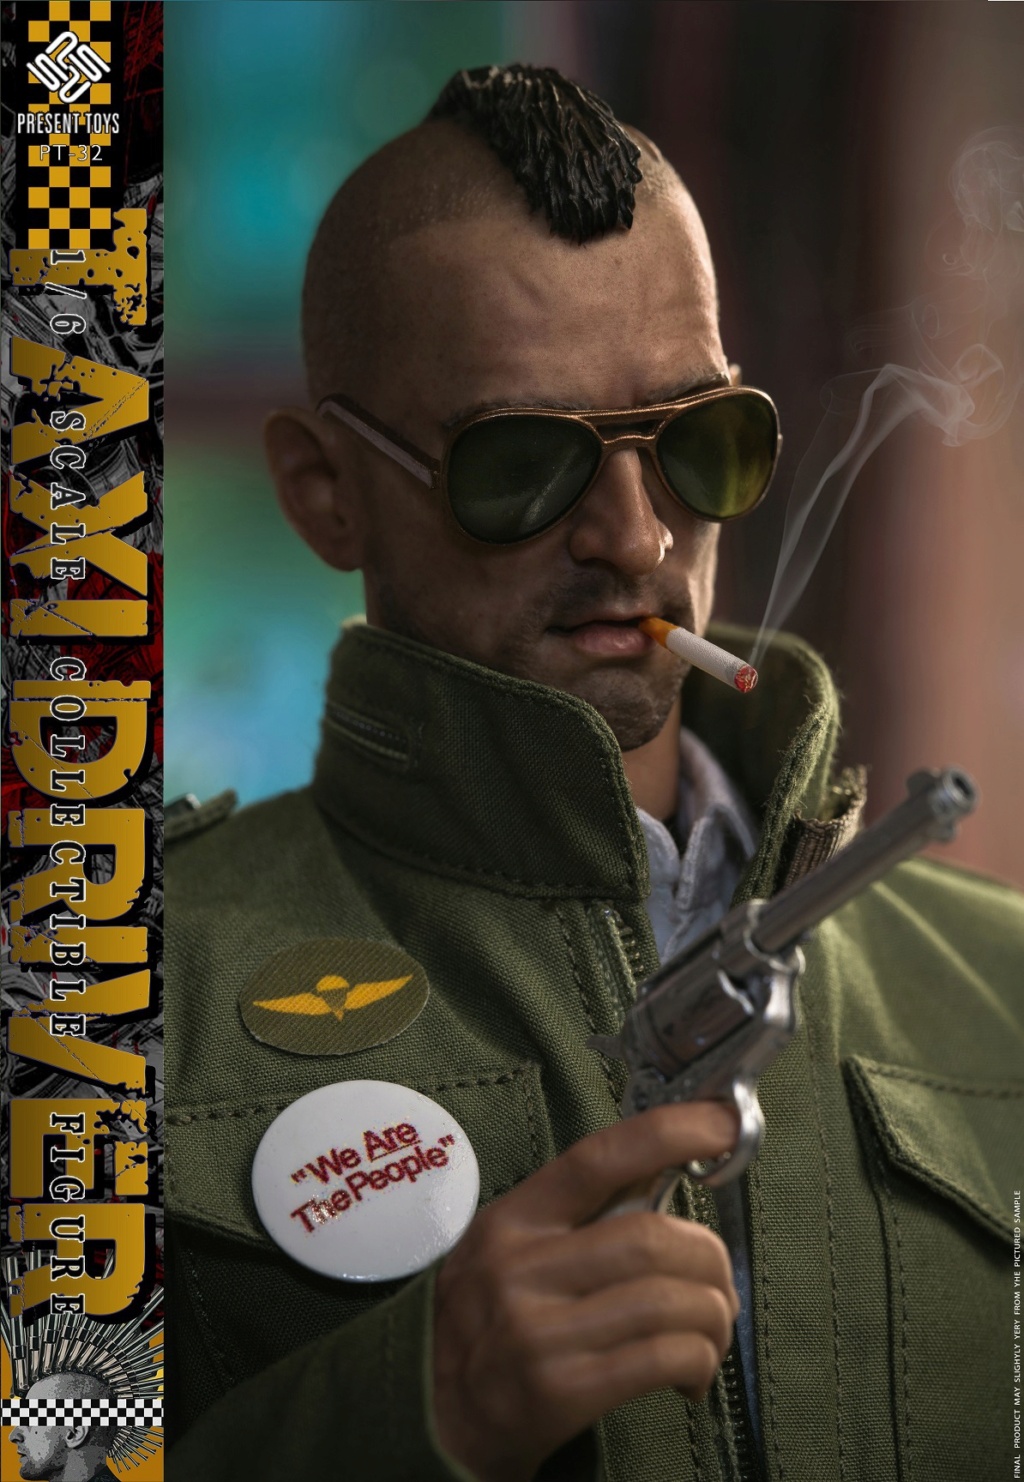 CrimeDrama - NEW PRODUCT: Present Toys: 1/6 "Taxi Driver" Collection Doll#PT-sp32 18193210